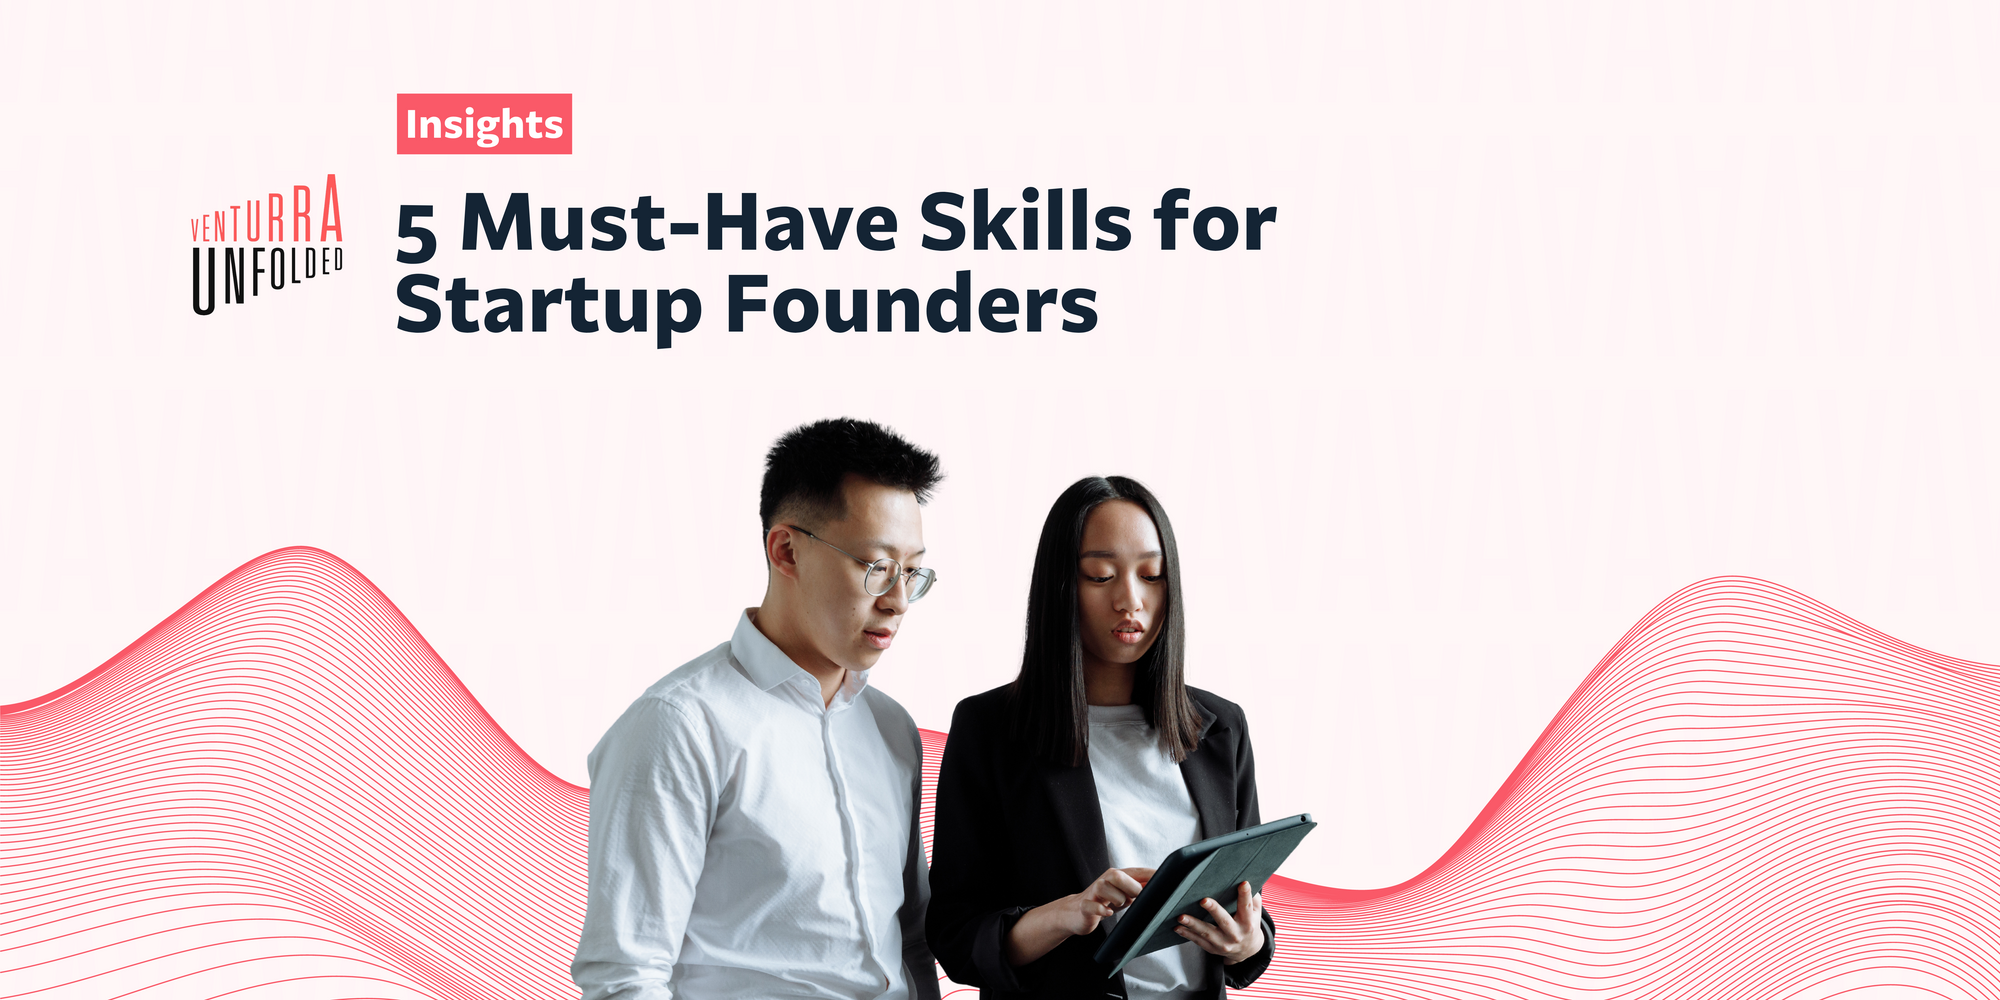 5 Must-Have Skills for Startup Founders